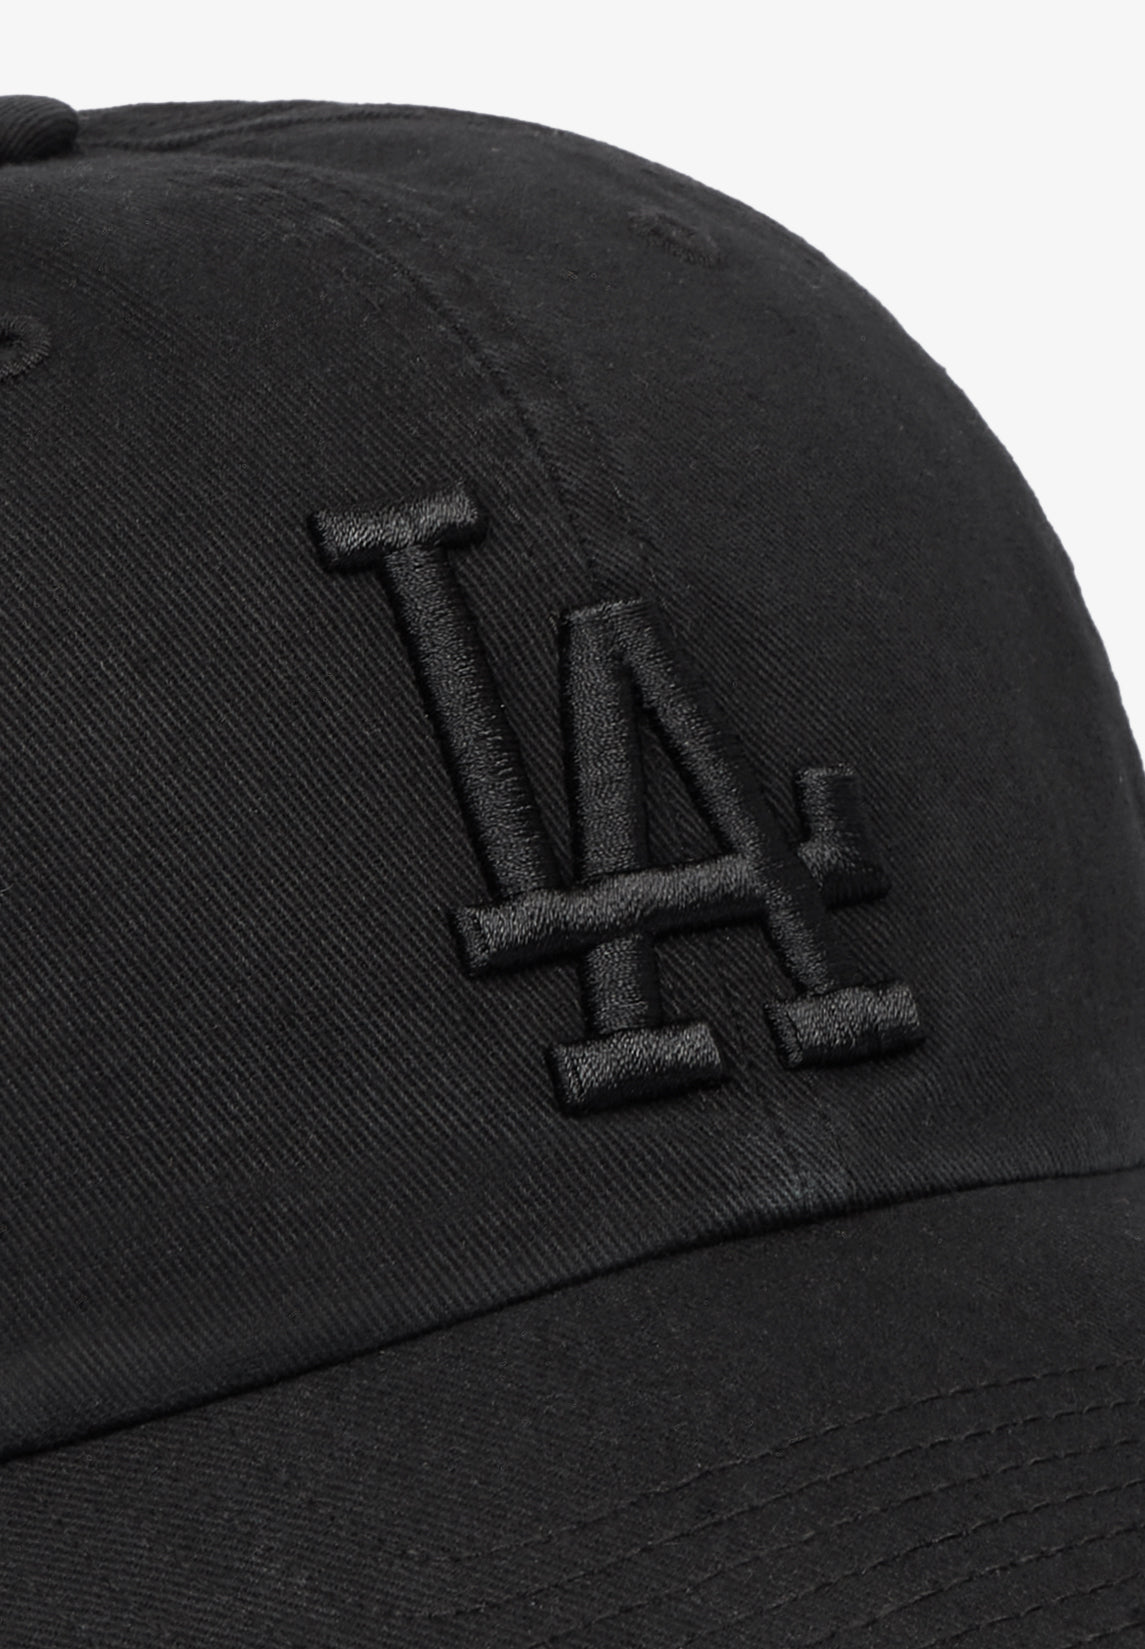 47 BRAND | MLB LOS ANGELES DODGERS '47 CLEAN UP